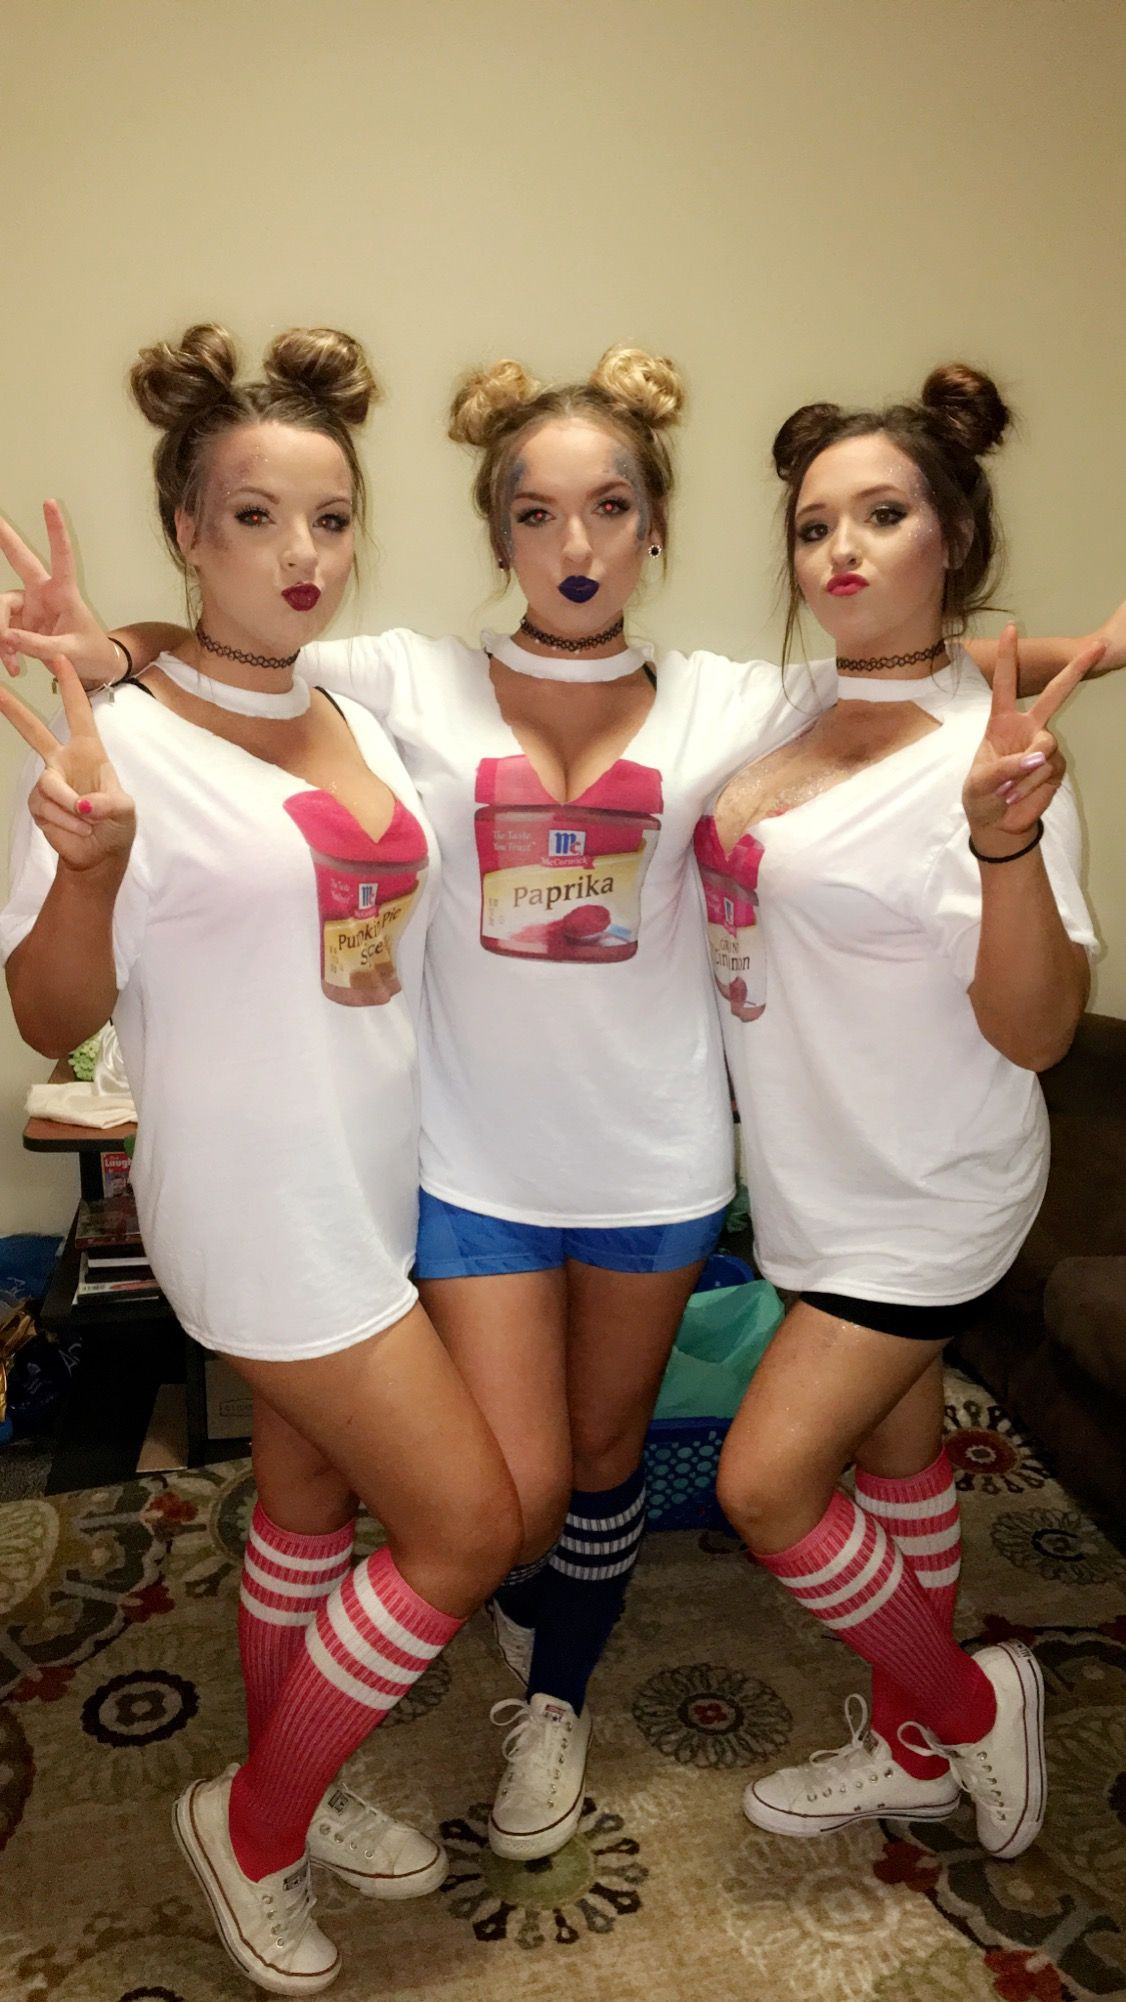 Halloween Party Ideas For College Students
 Spice Girls Cute College Halloween Costume ️